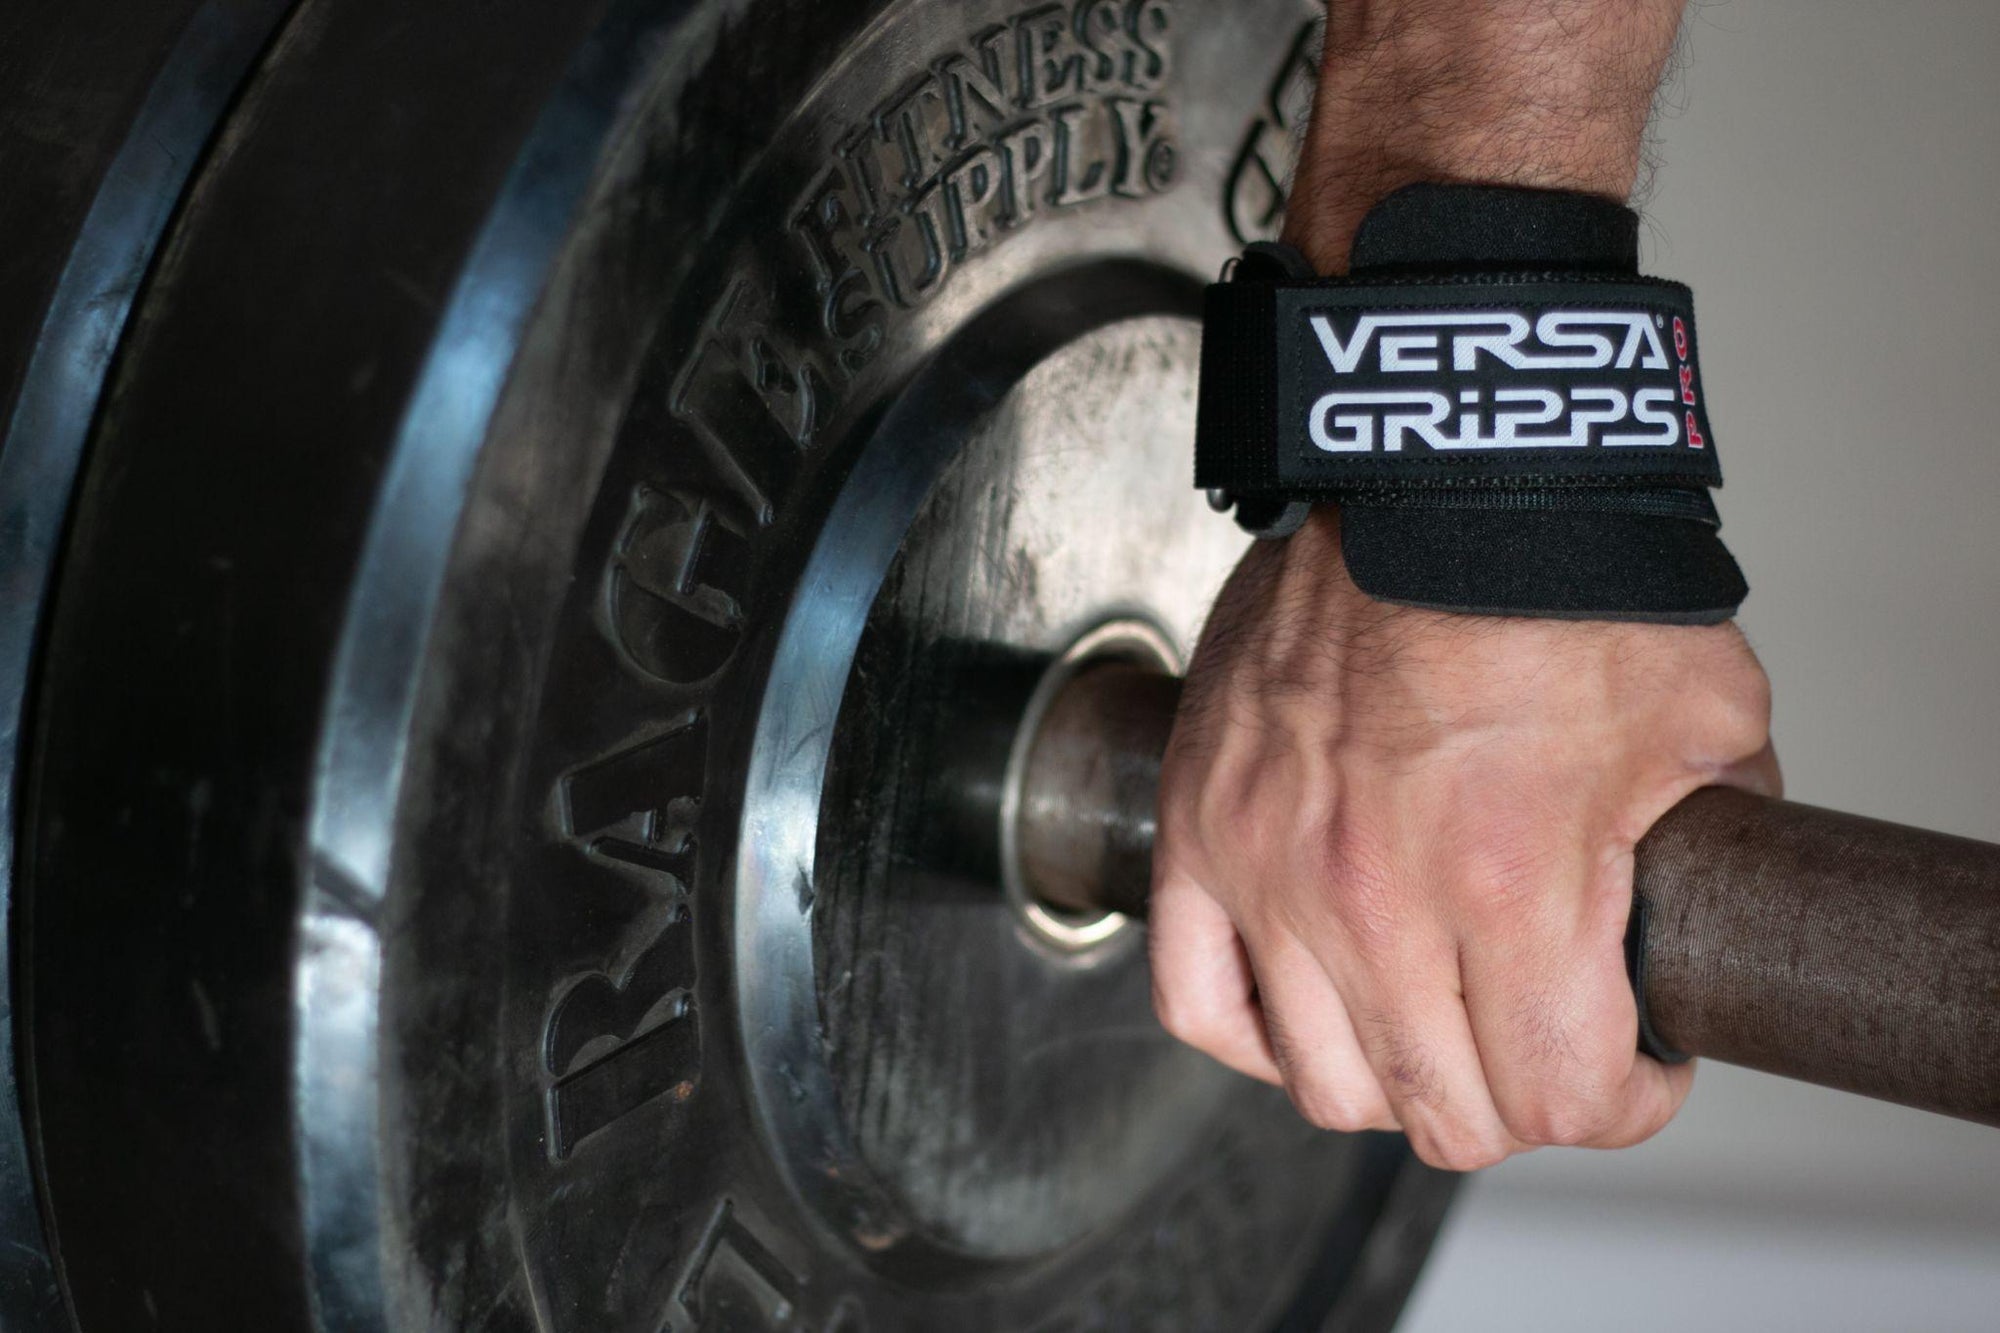 Versa Gripps Pro series being used in a lifting exercise 